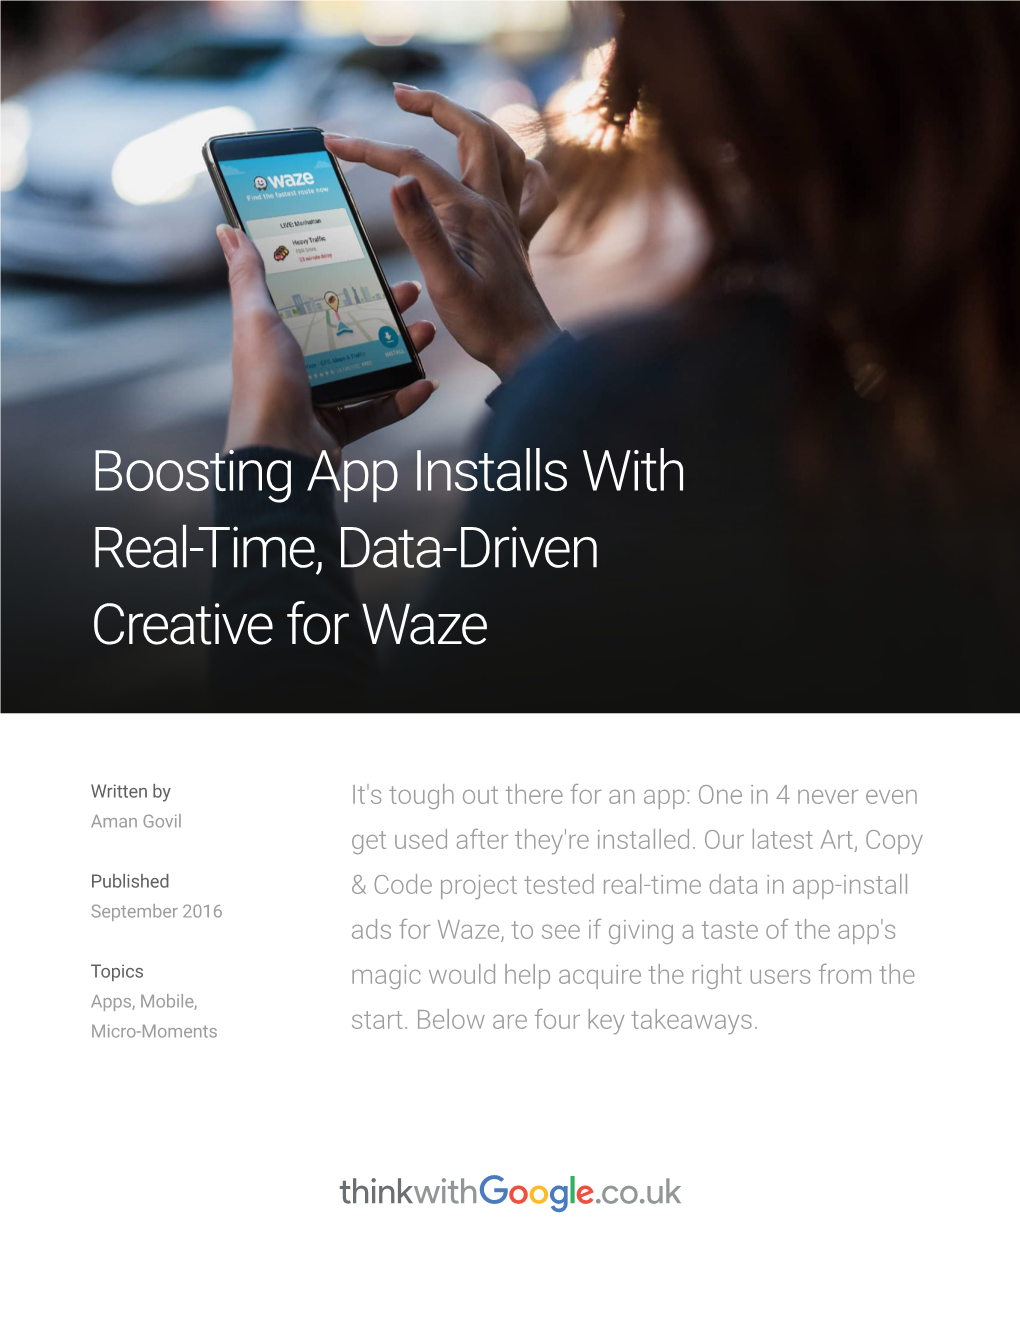 Boosting App Installs with Real-Time, Data-Driven Creative for Waze